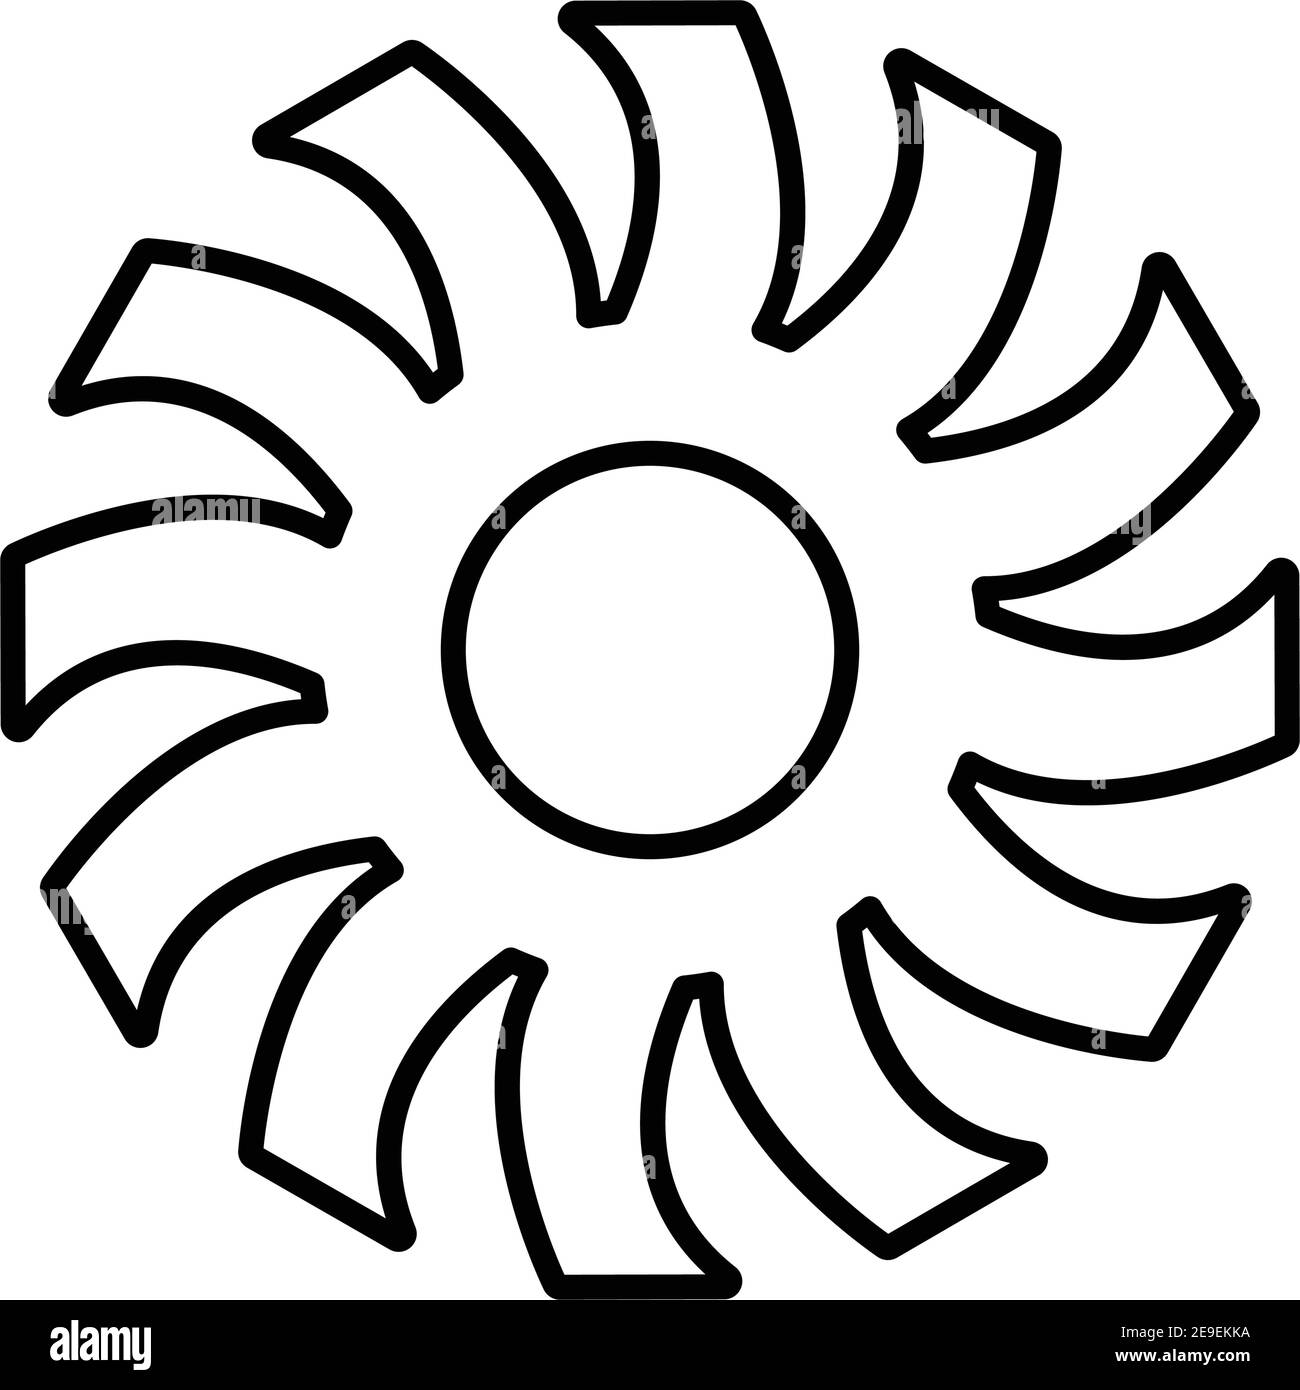 10,771 Rotary Cutting Wheel Images, Stock Photos, 3D objects, & Vectors